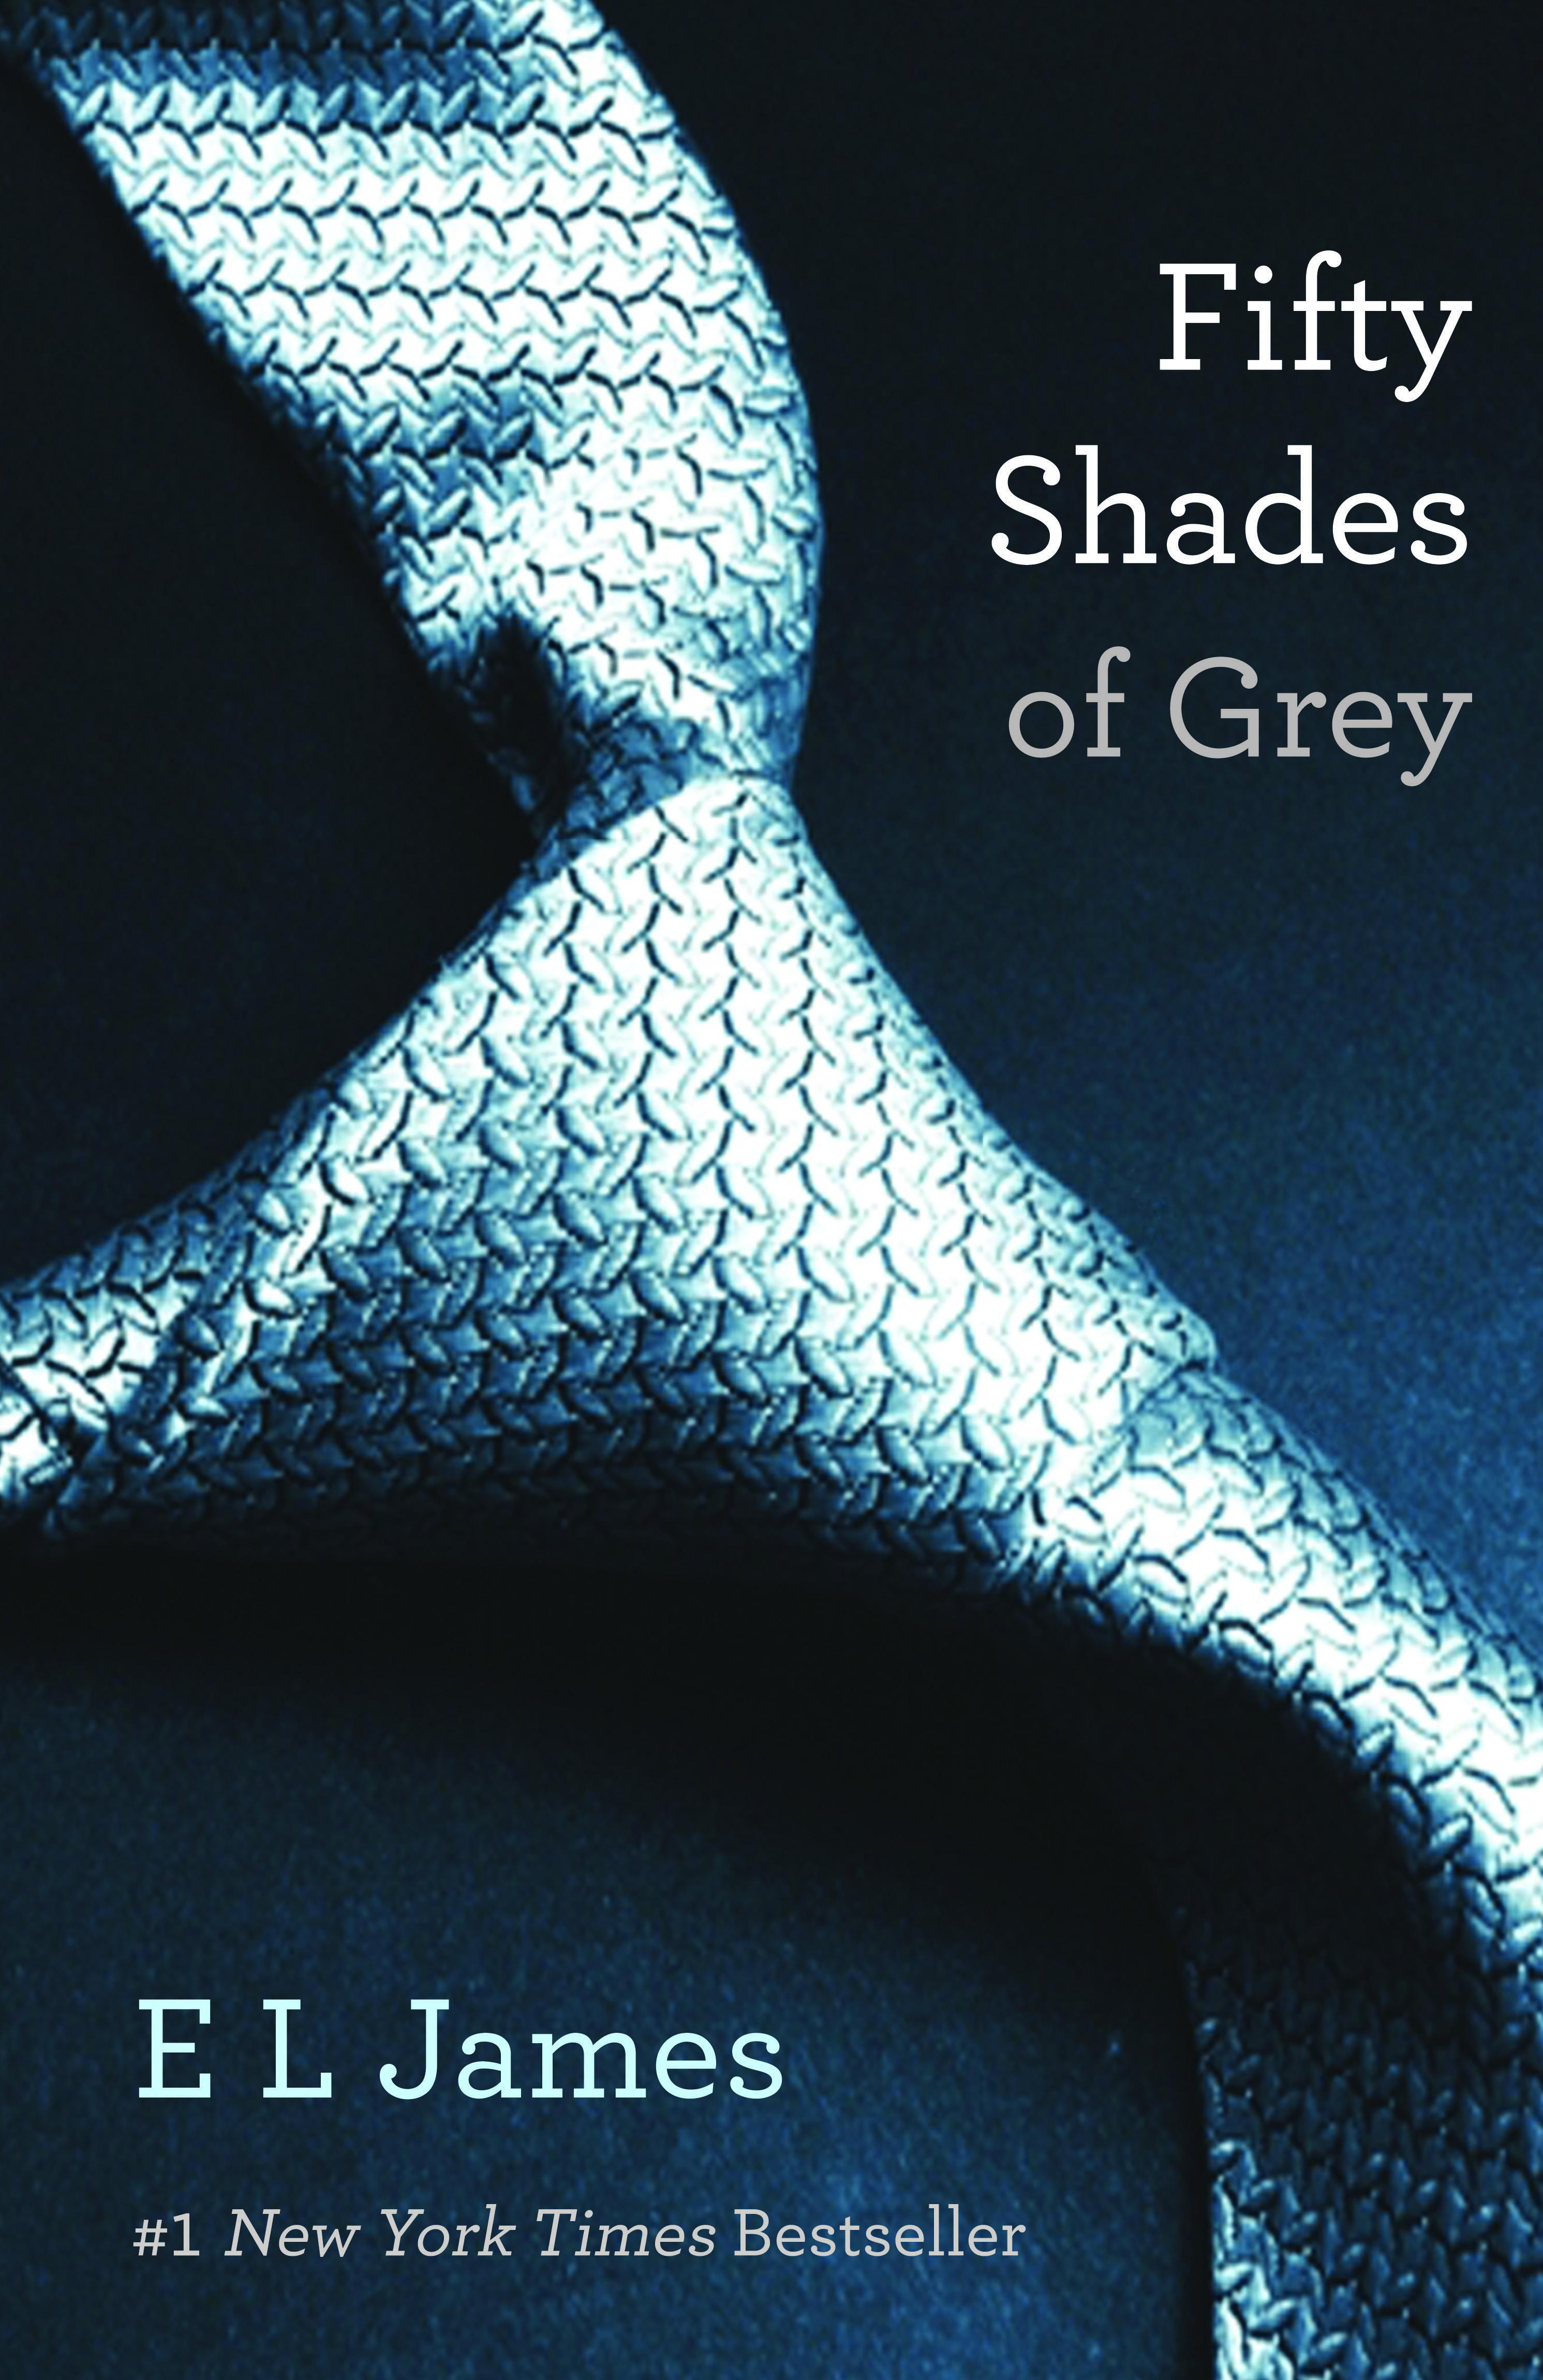 Caroline Mickler Appointed to Represent Fifty Shades of Grey - The ...